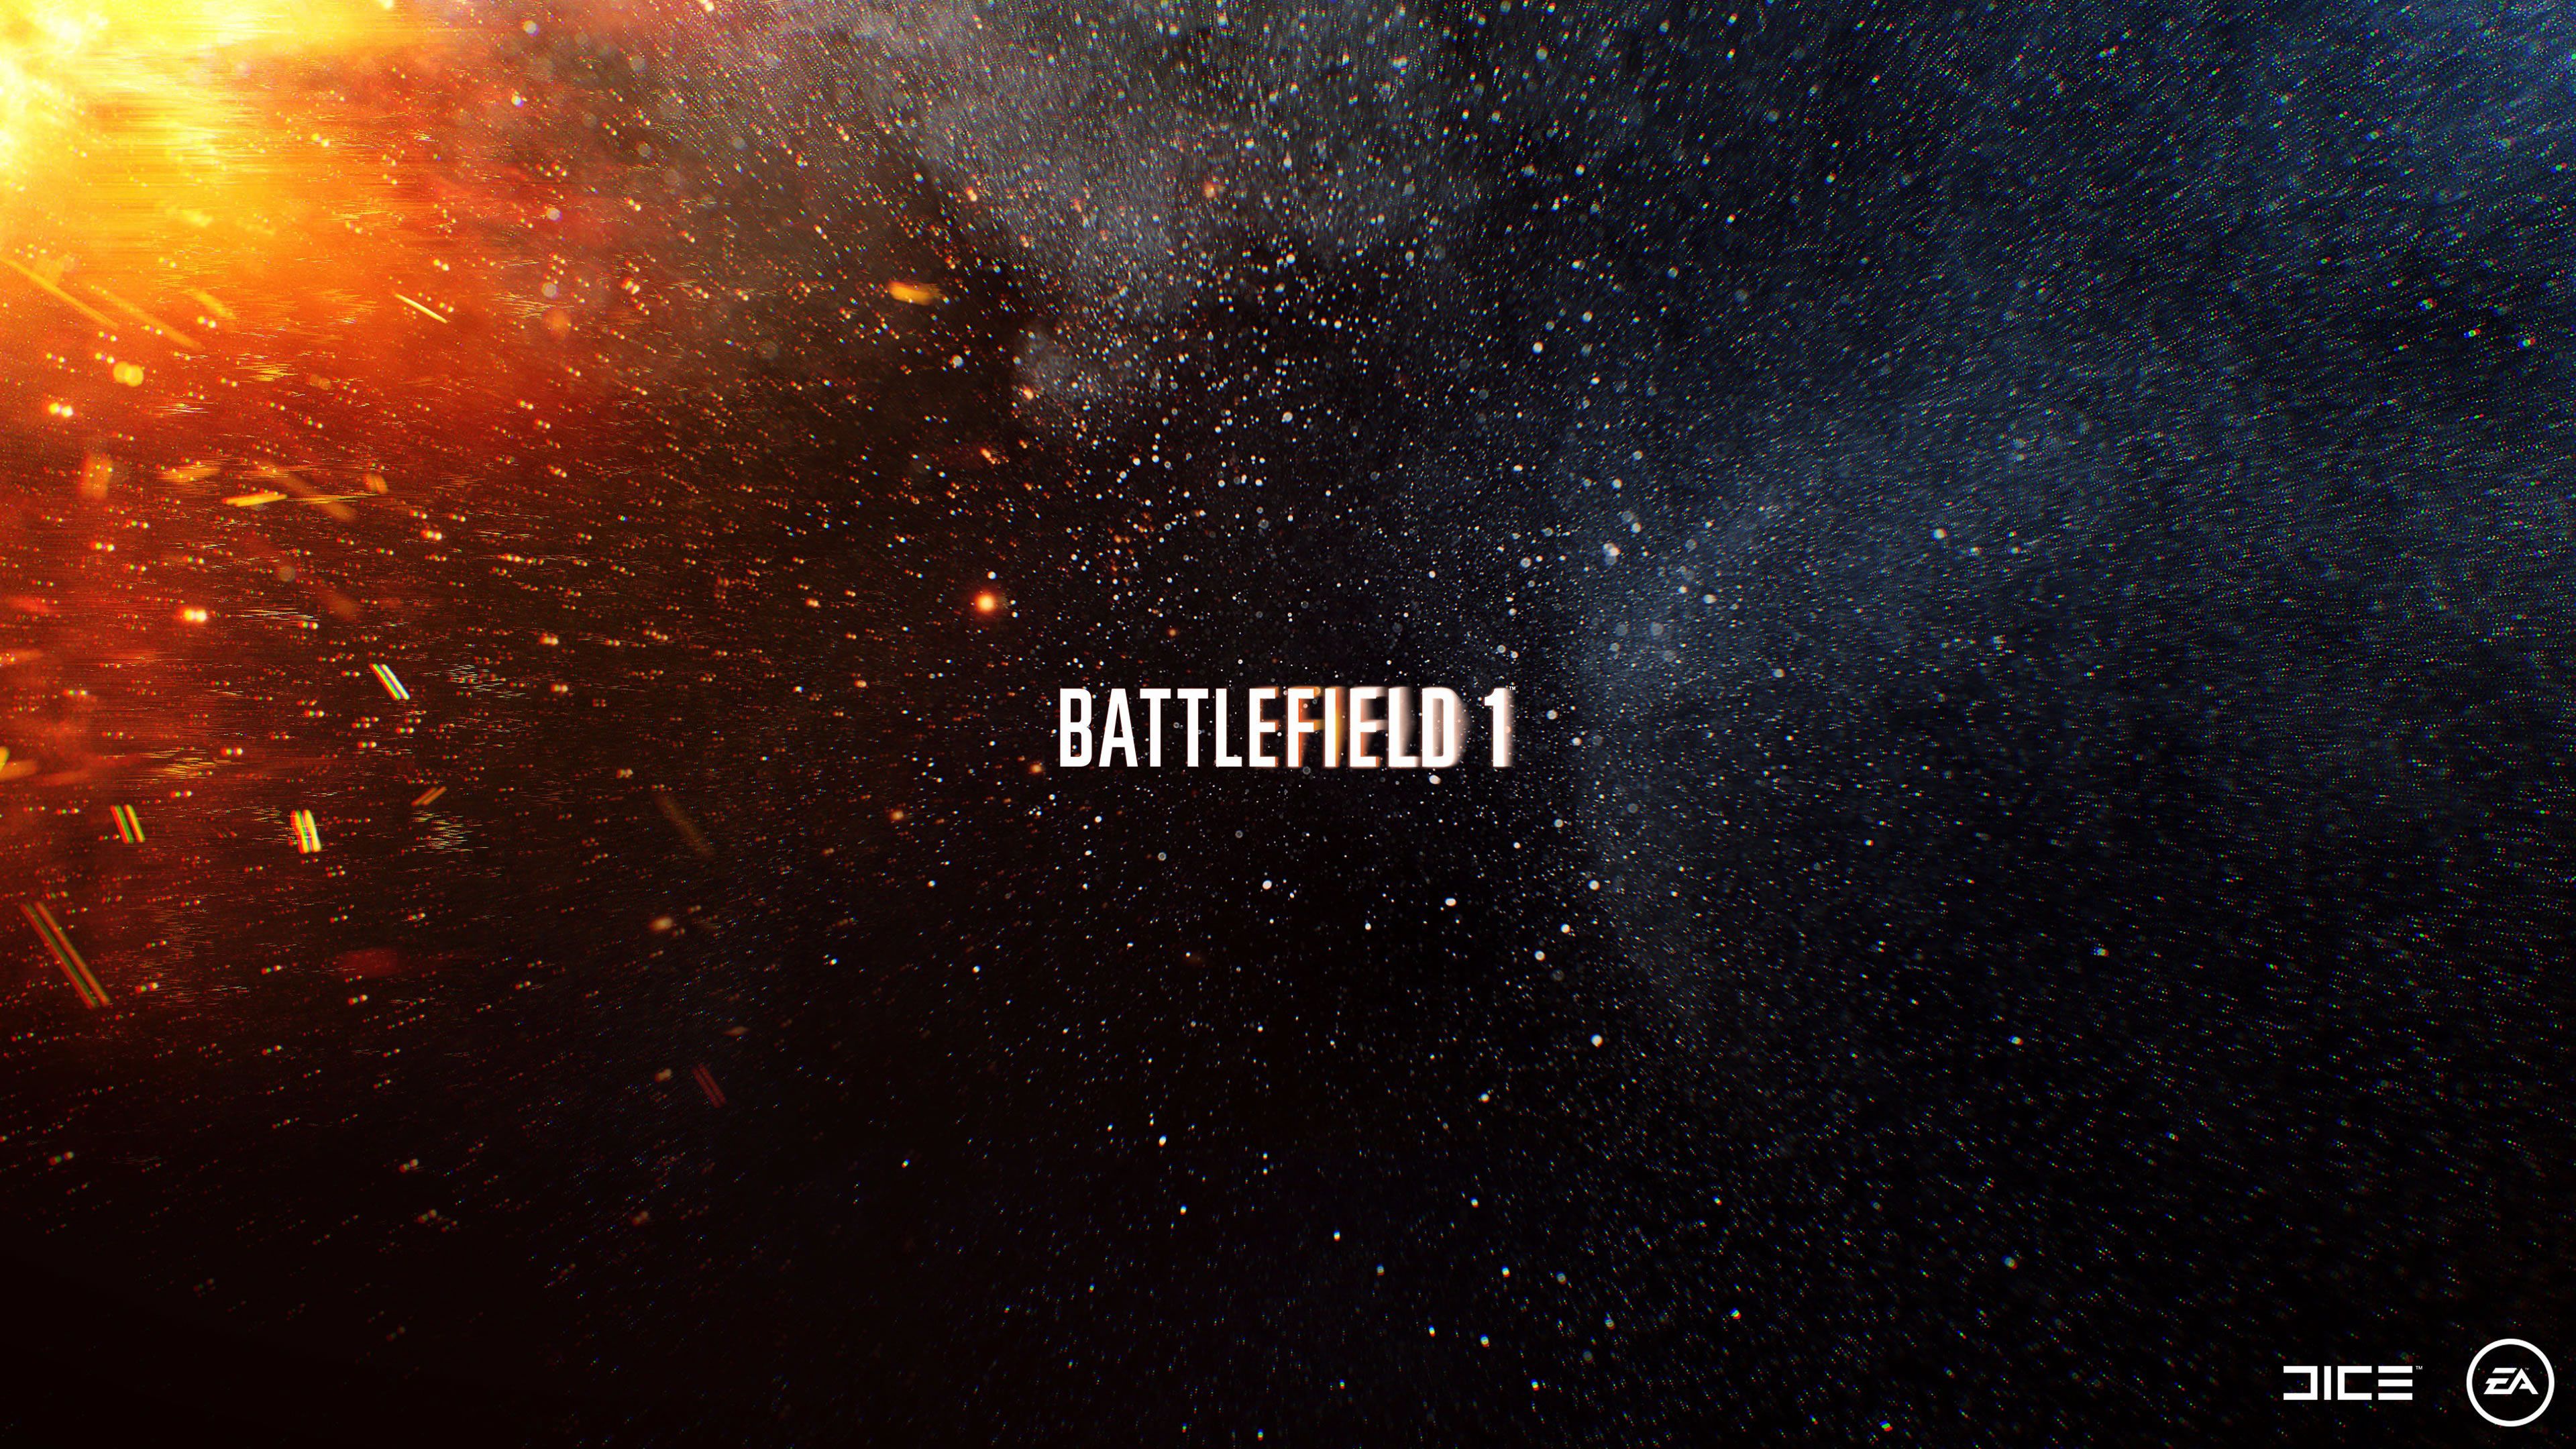 Check out this cool, minimalist Battlefield 1 4K wallpaper